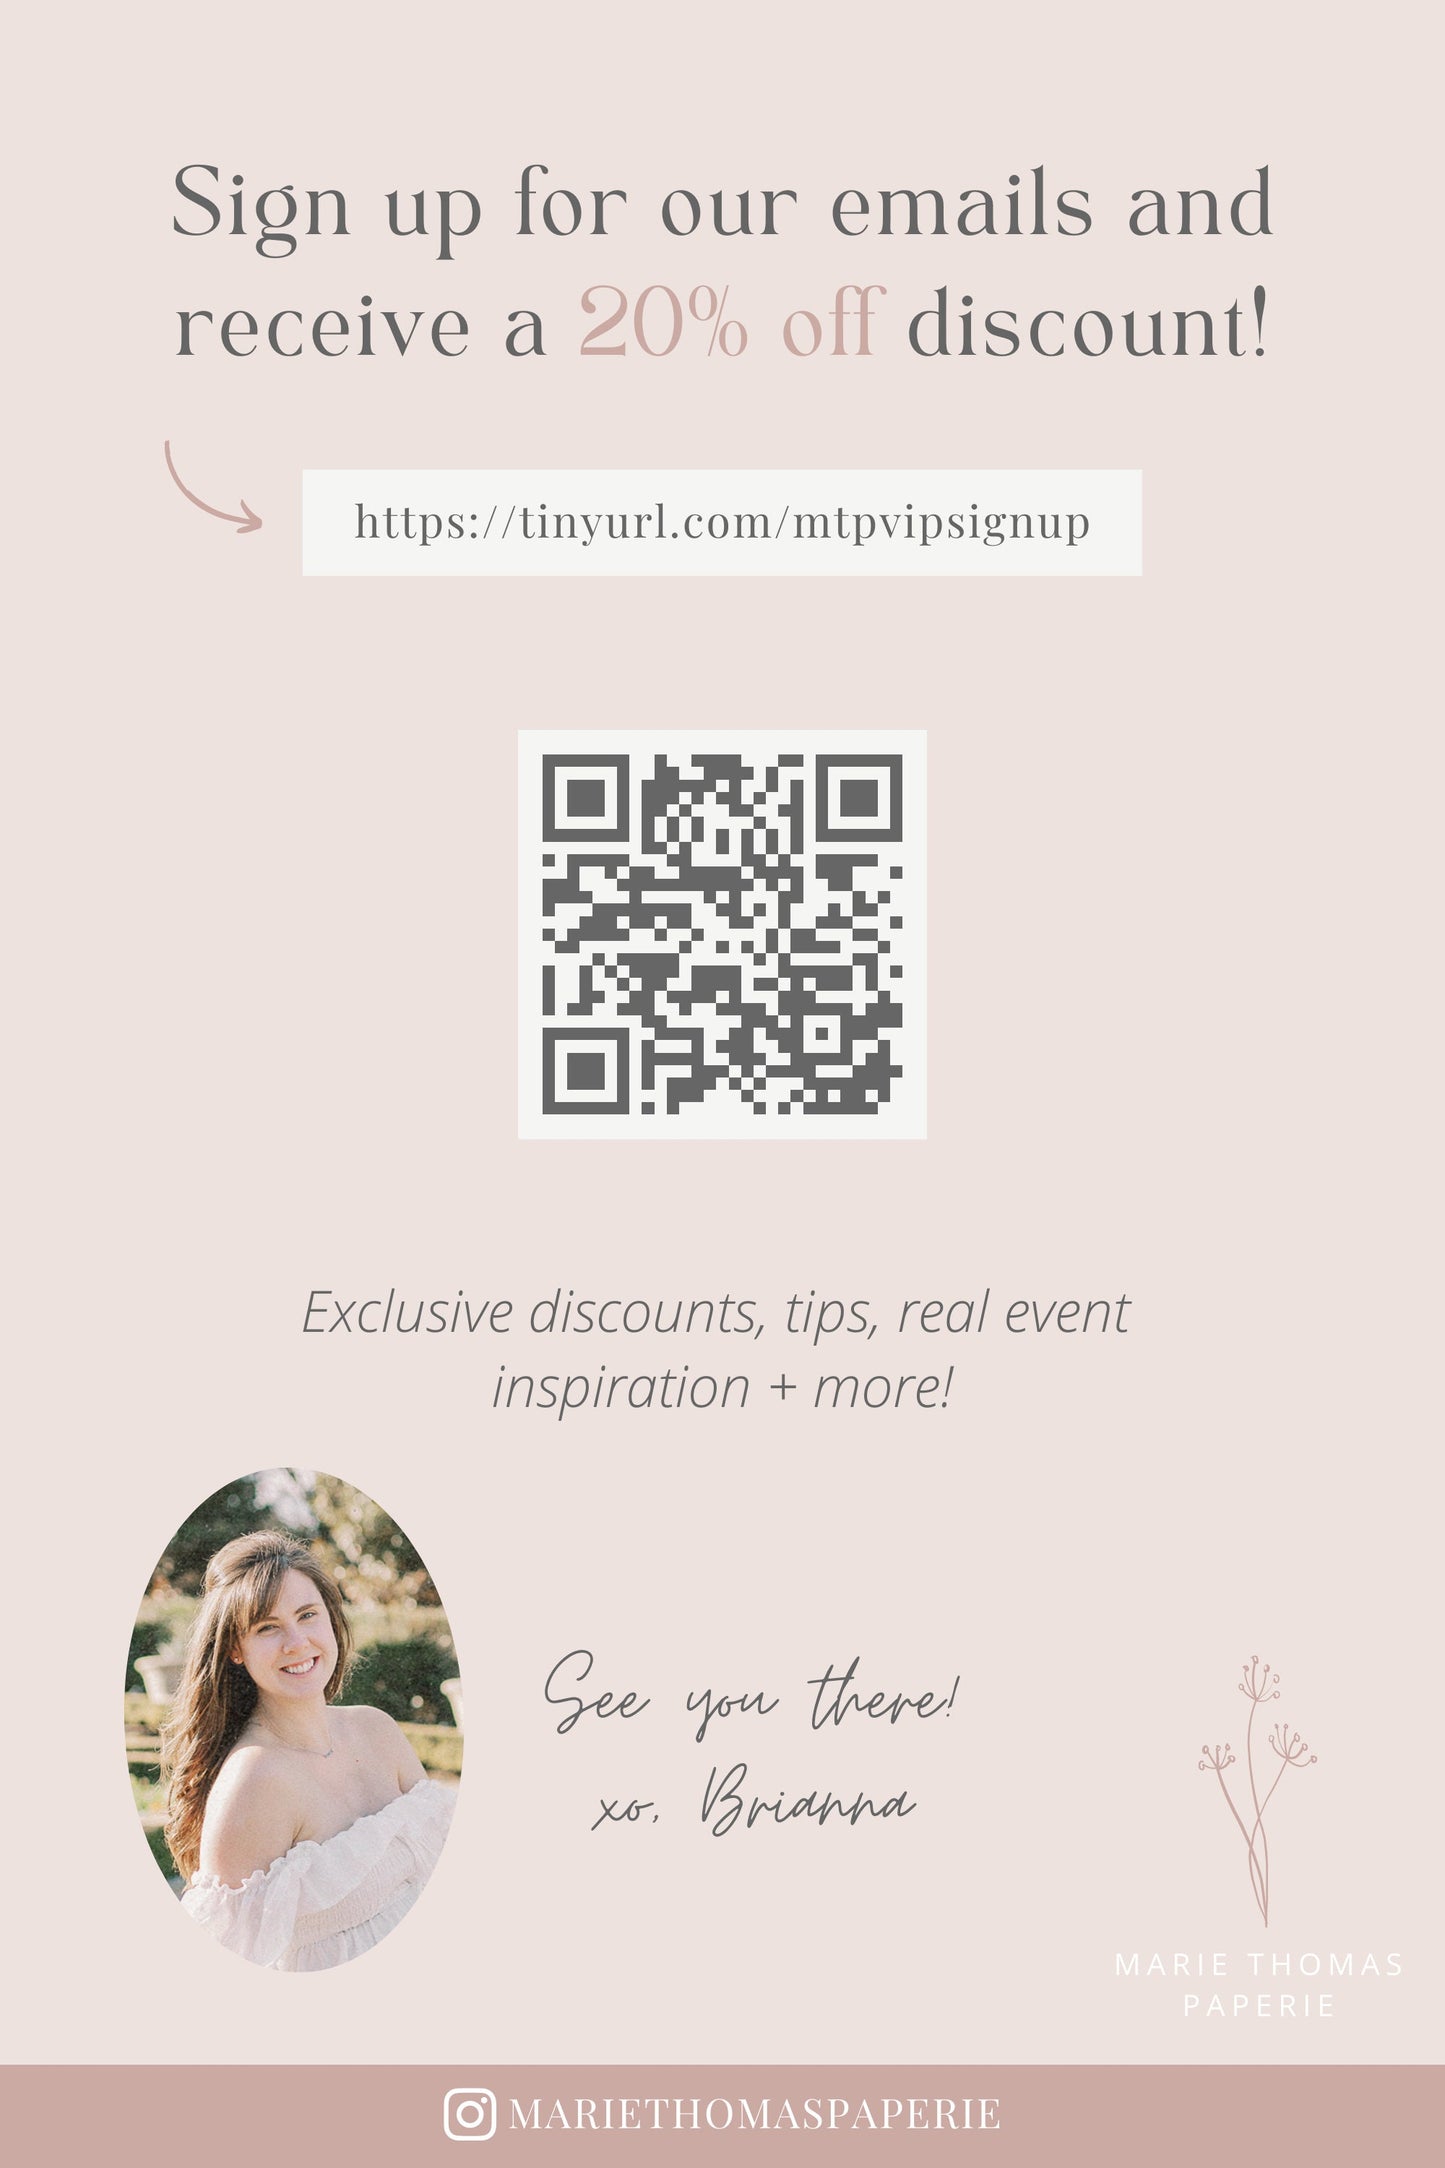 Editable Modern Save the Date with Photo Save the Date Cards Wedding Announcement Text Digital Template